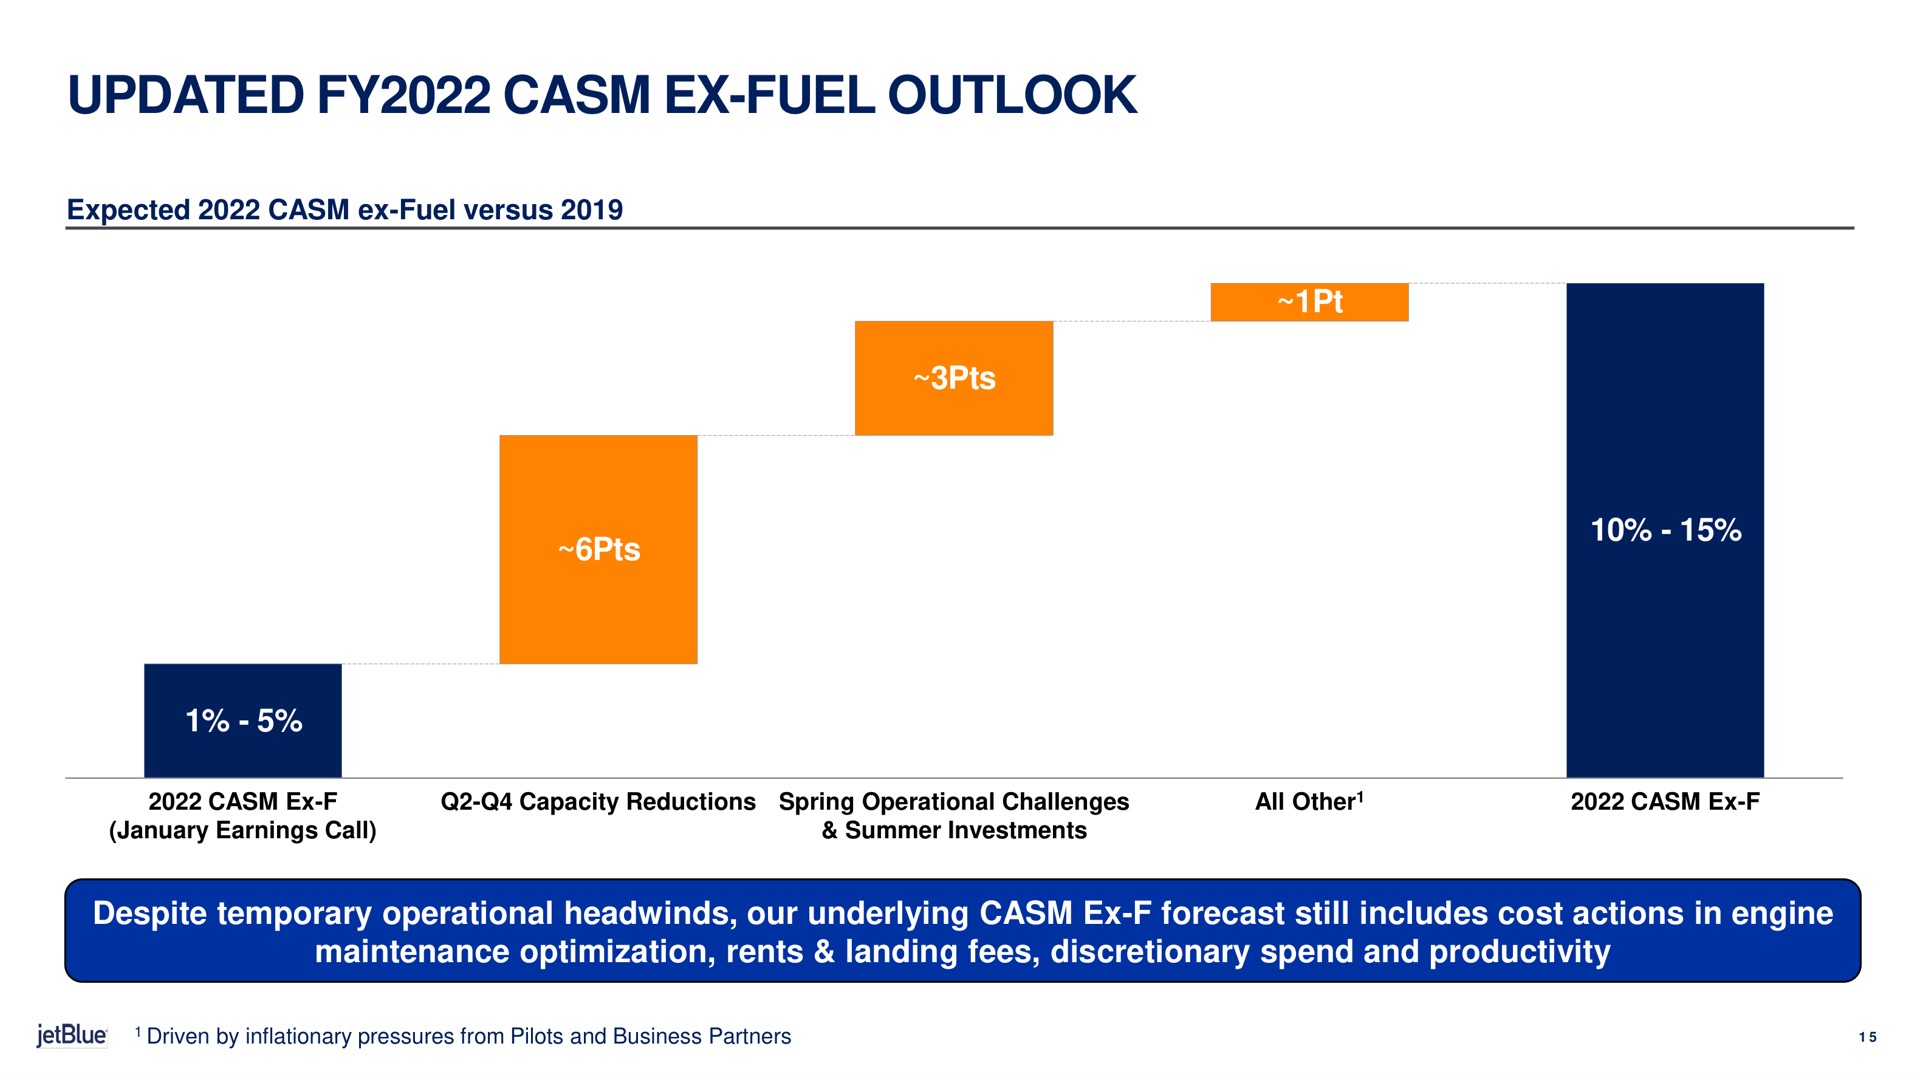 updated fuel outlook | jetBlue